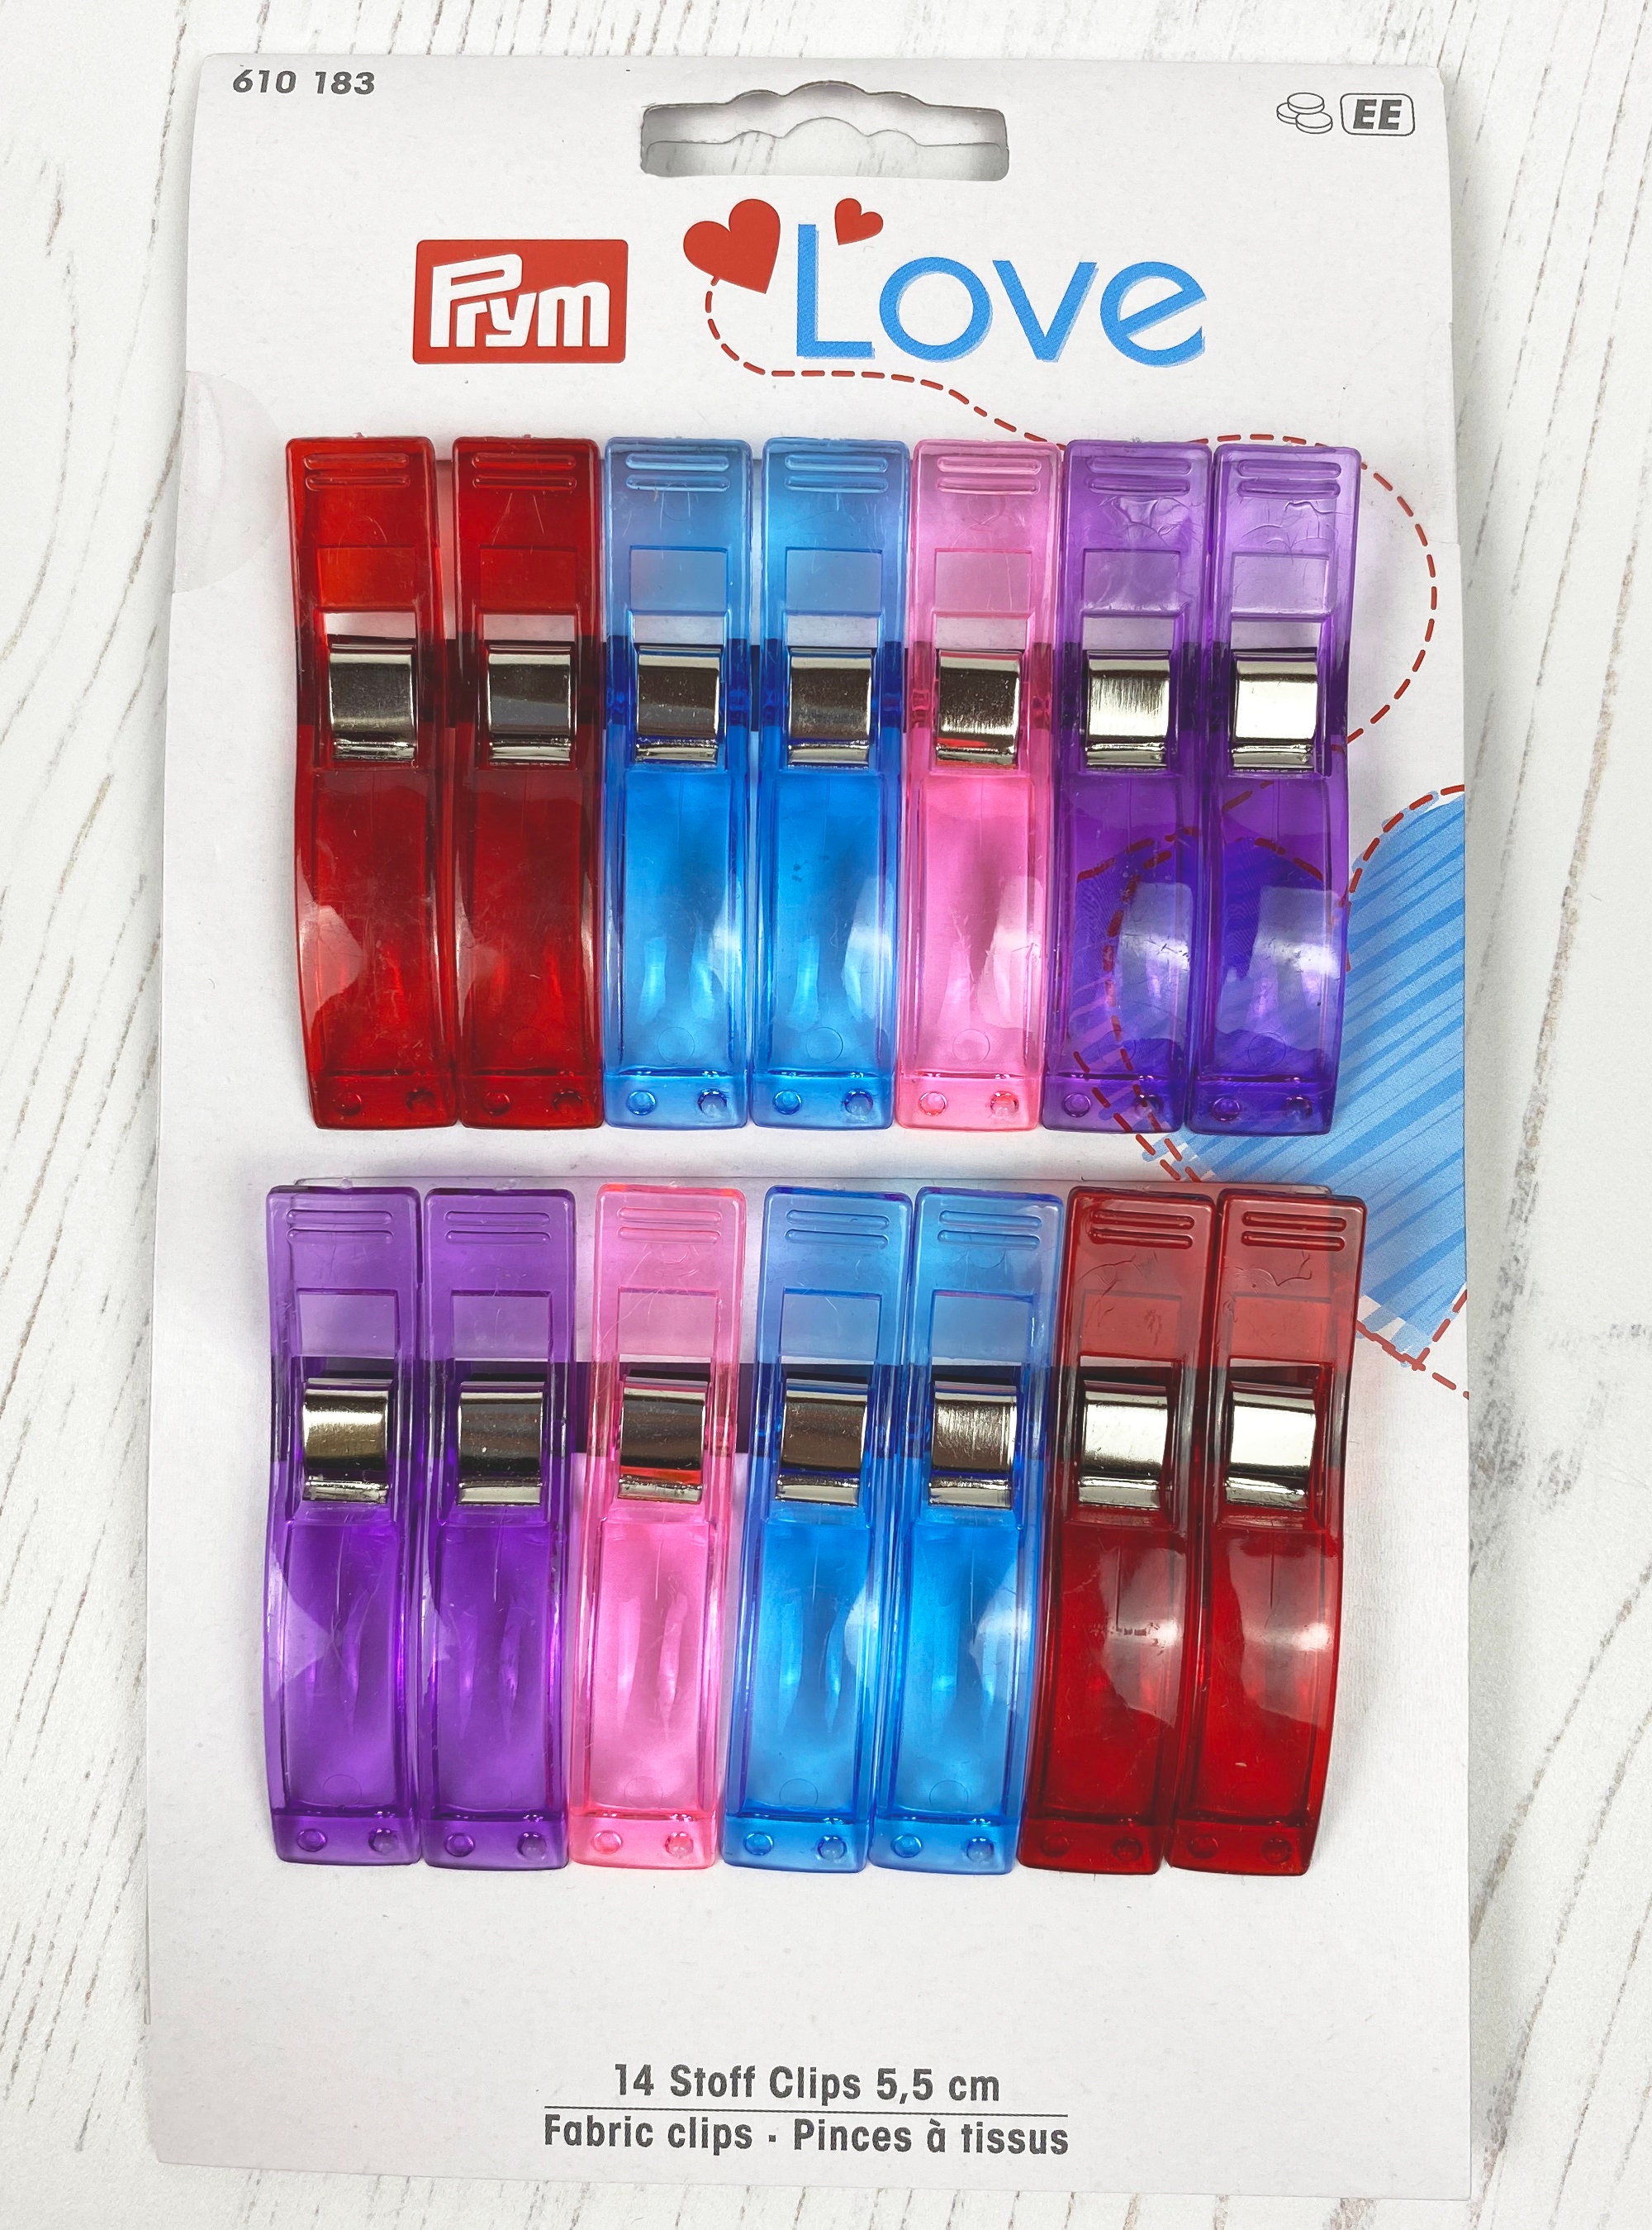 Prym Love Fabric Clips, 5cm, Pack of 15